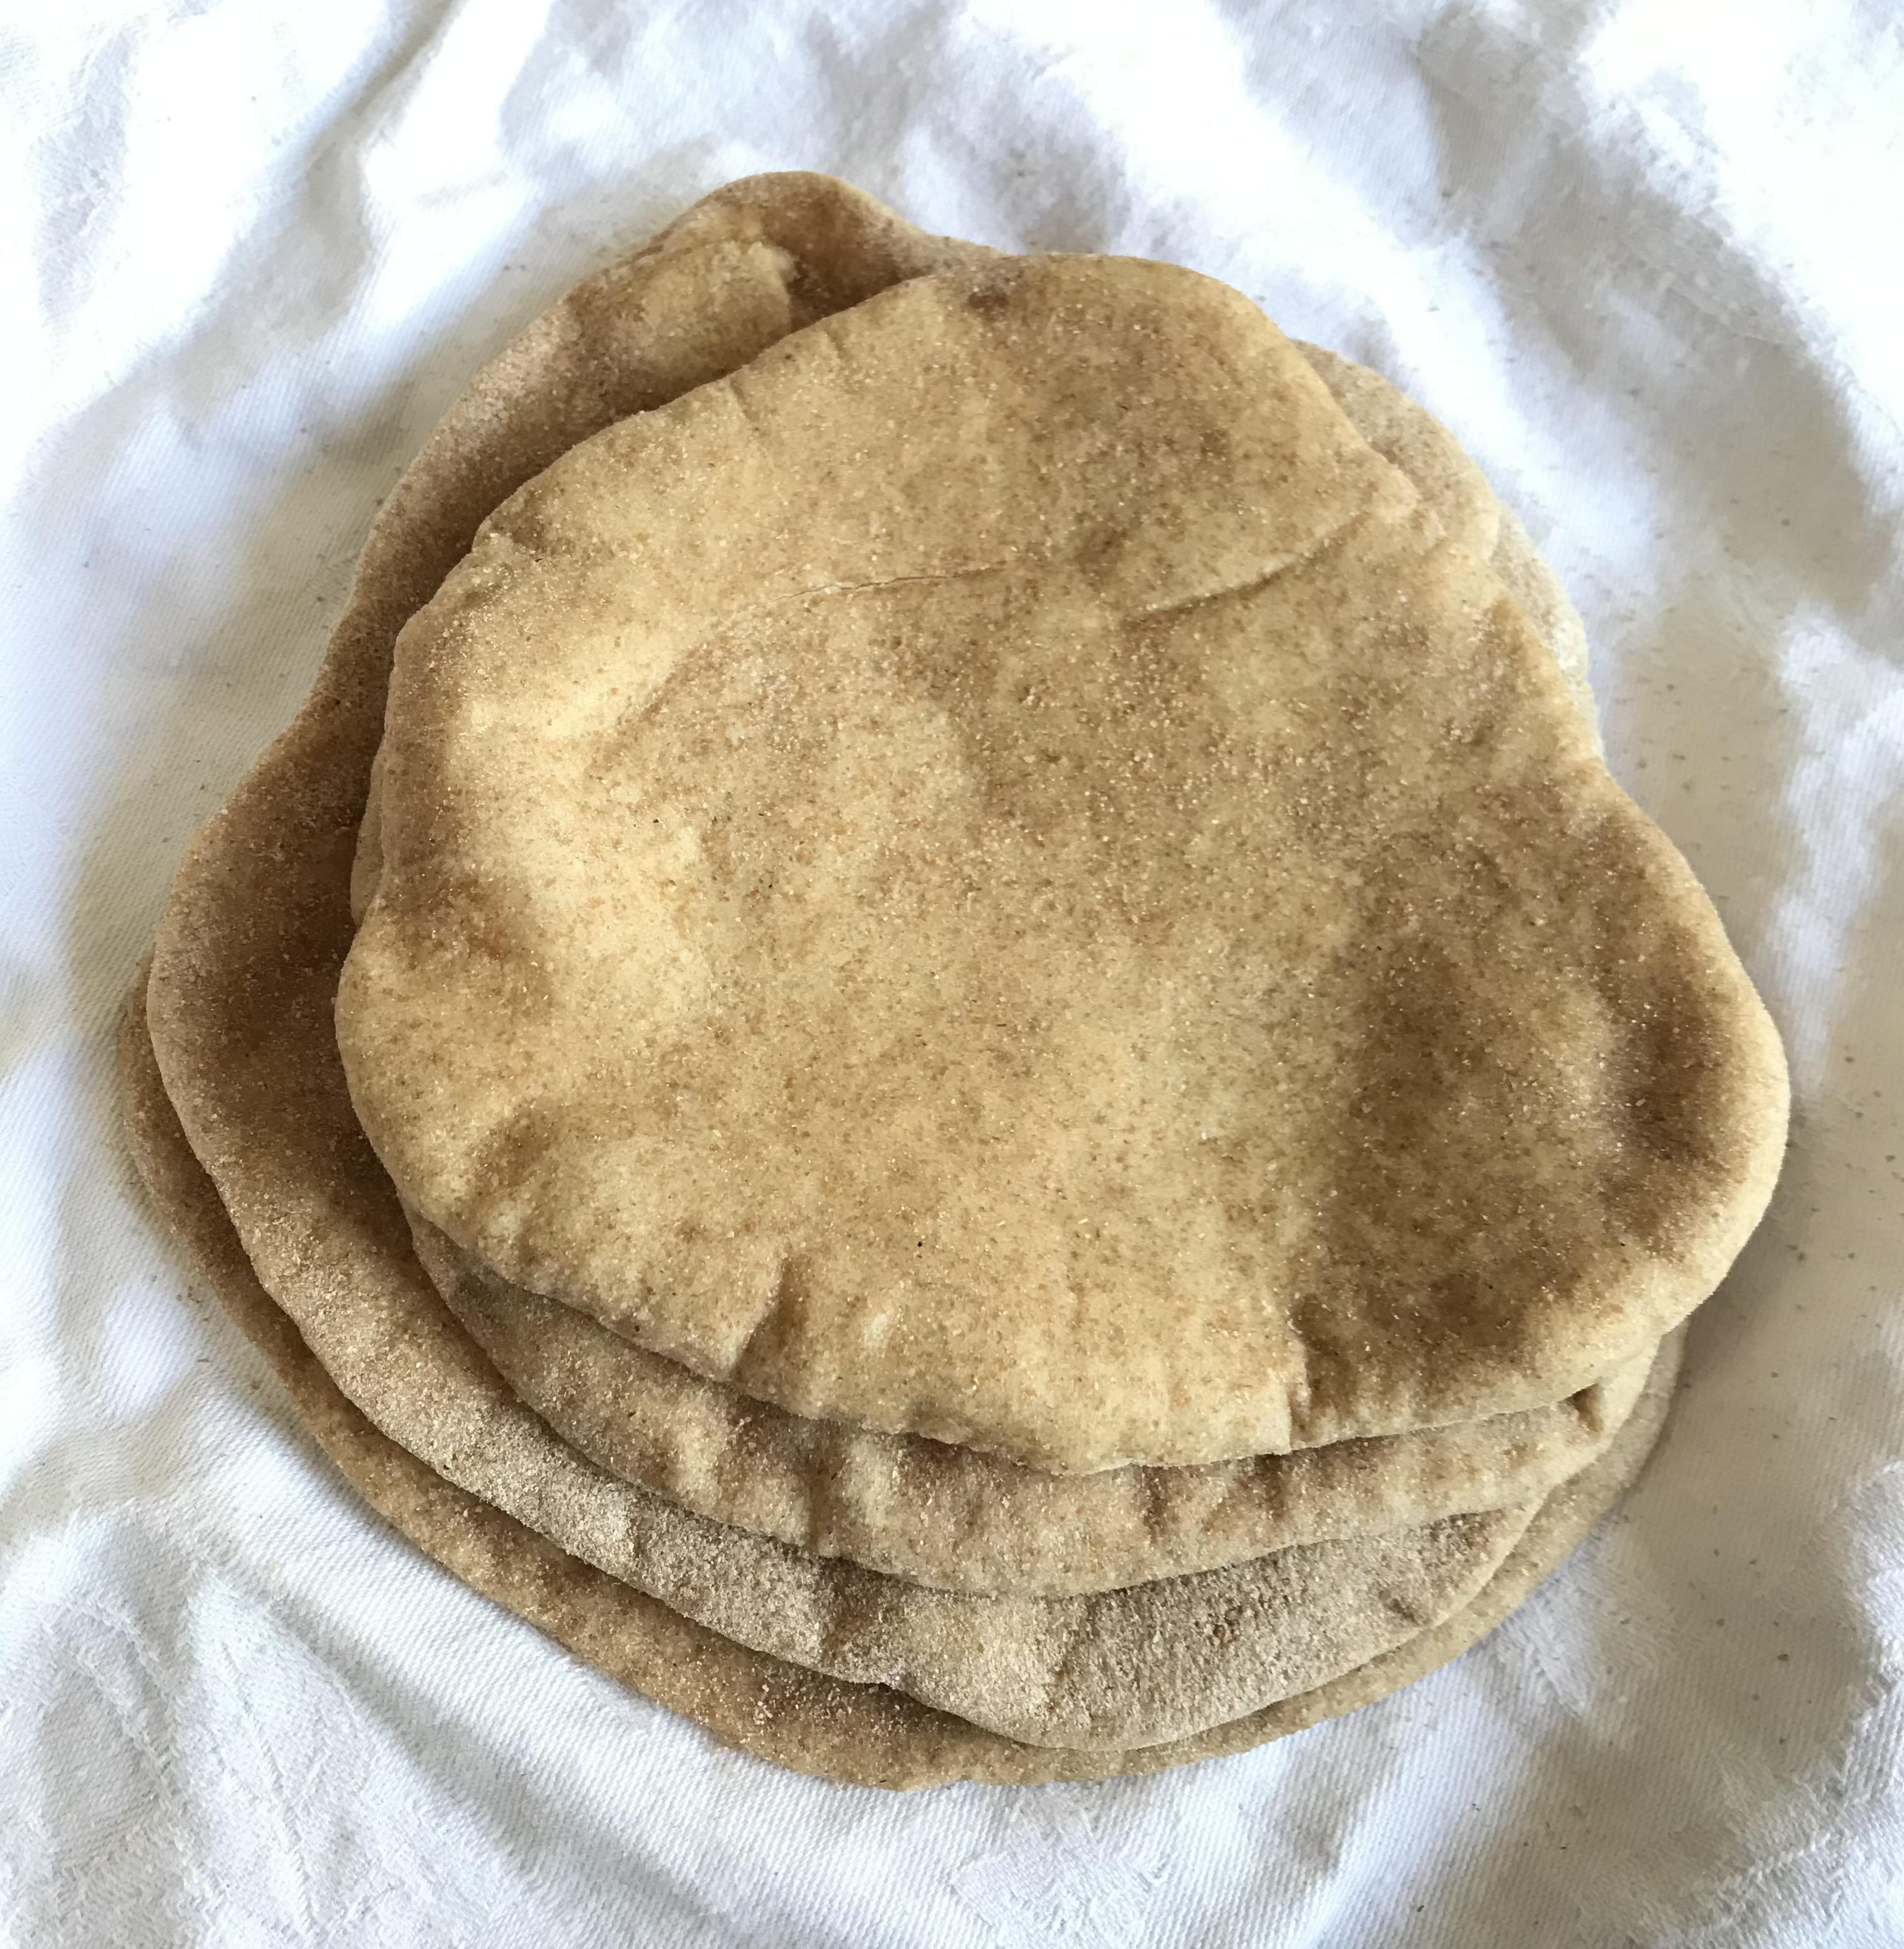 Gluten Free Flat Bread Recipe for Induction Cooktops - Simply